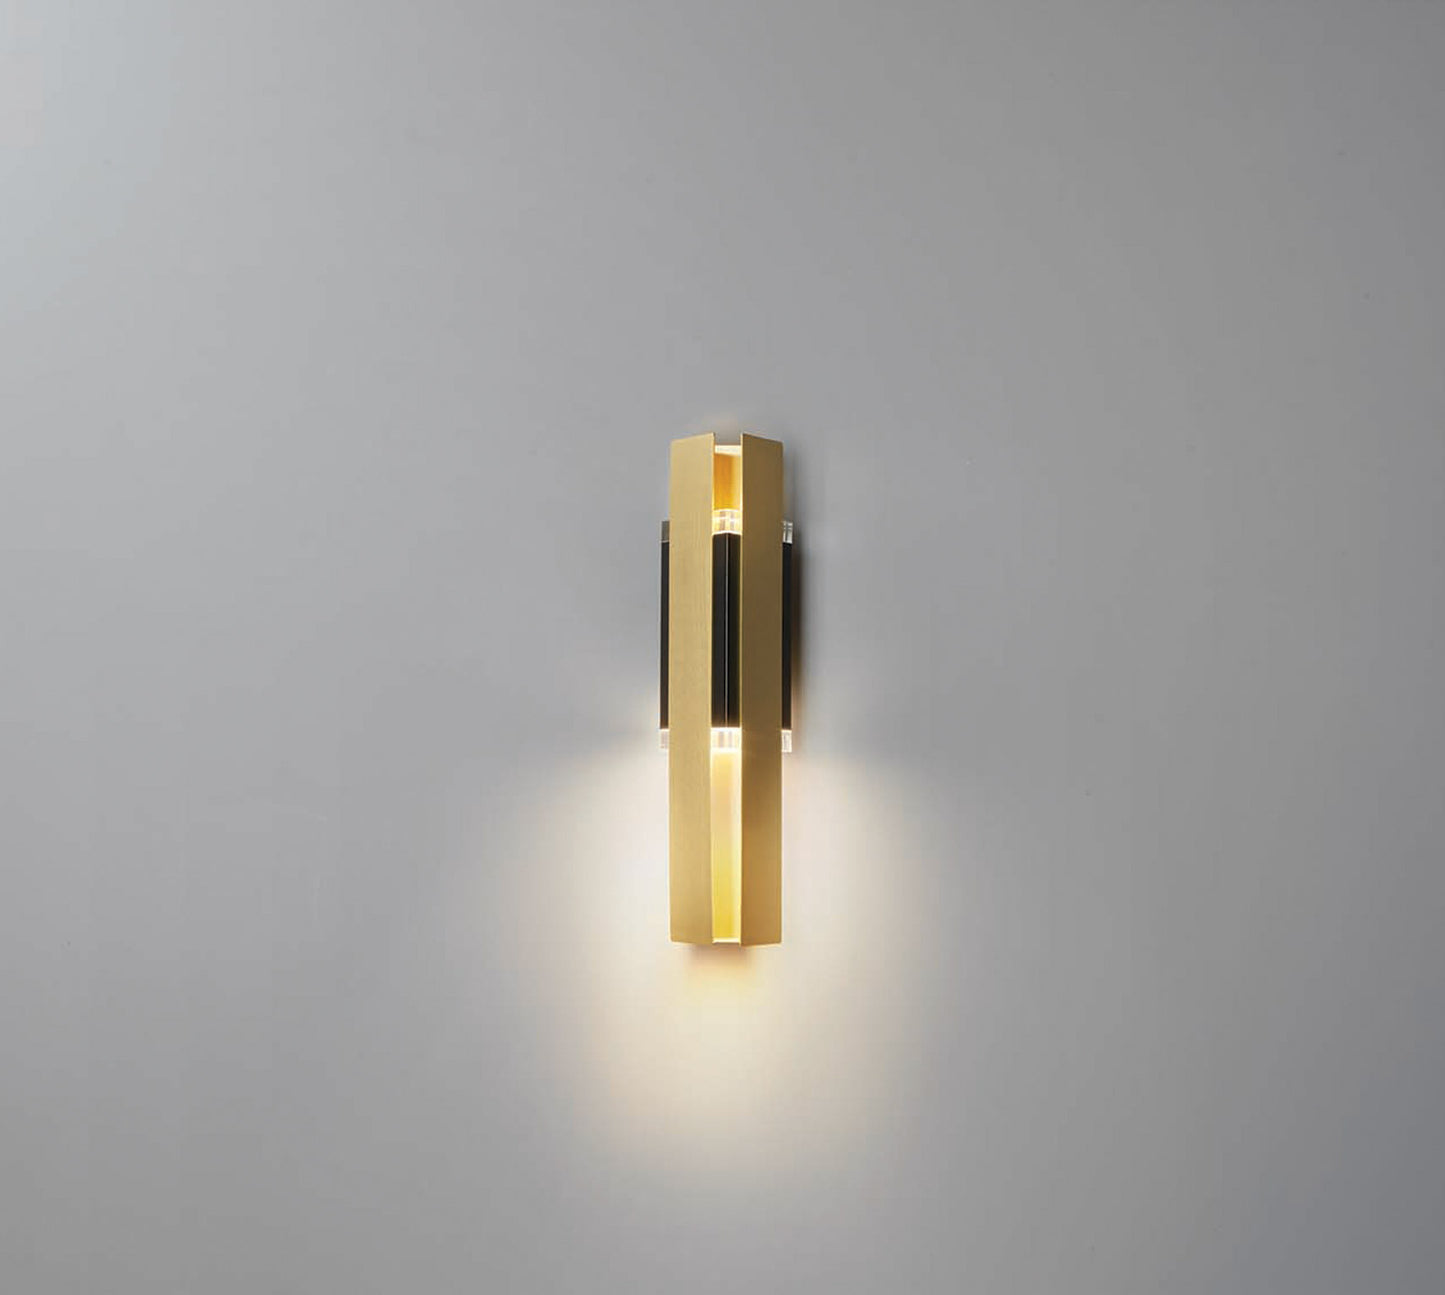 EXCALIBUR WALL LIGHT 559.41 BY TOOY $870.00